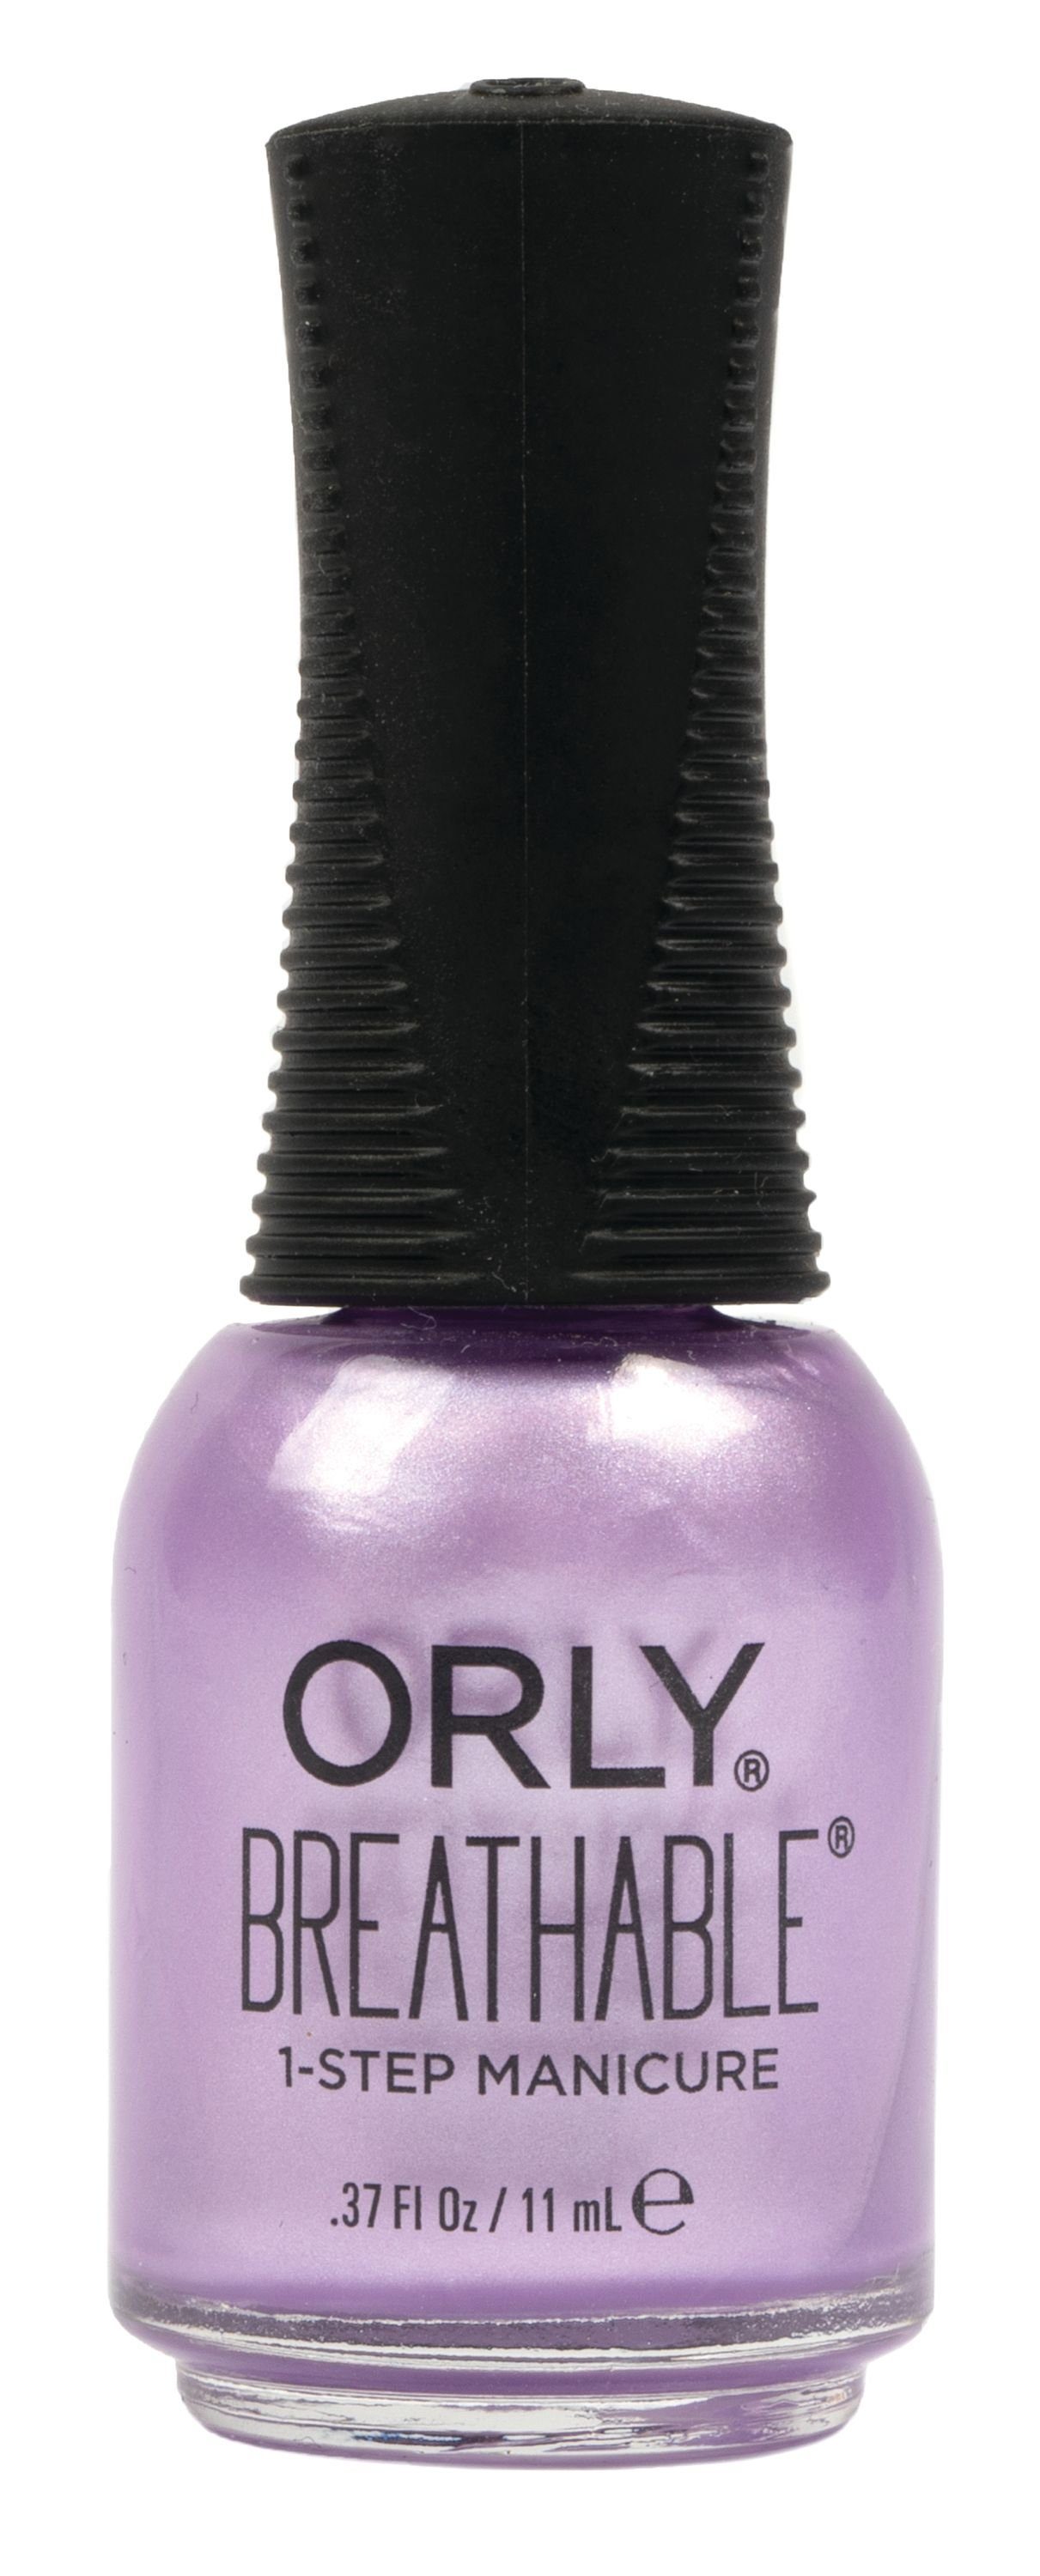 ORLY Nagellack Breathable ORLY 11 JUST ml SQUID-ING